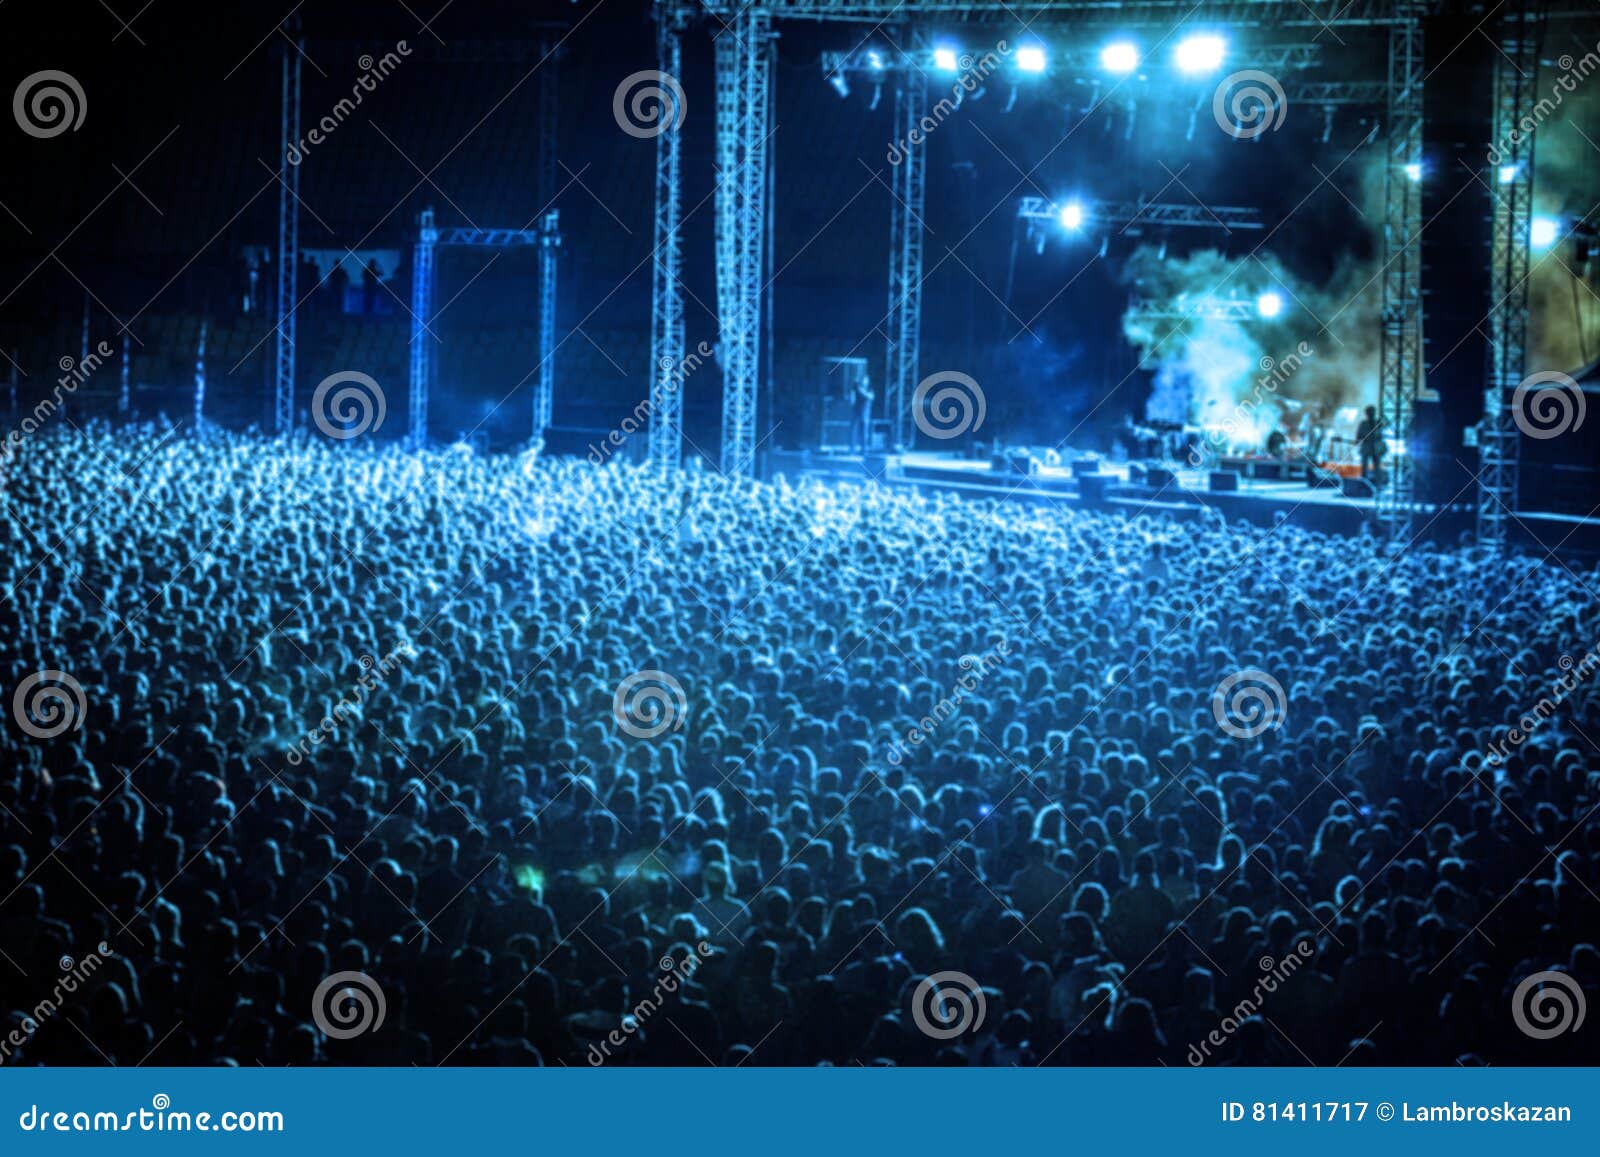 blurred image of huge crow of people at music concert, in blue t